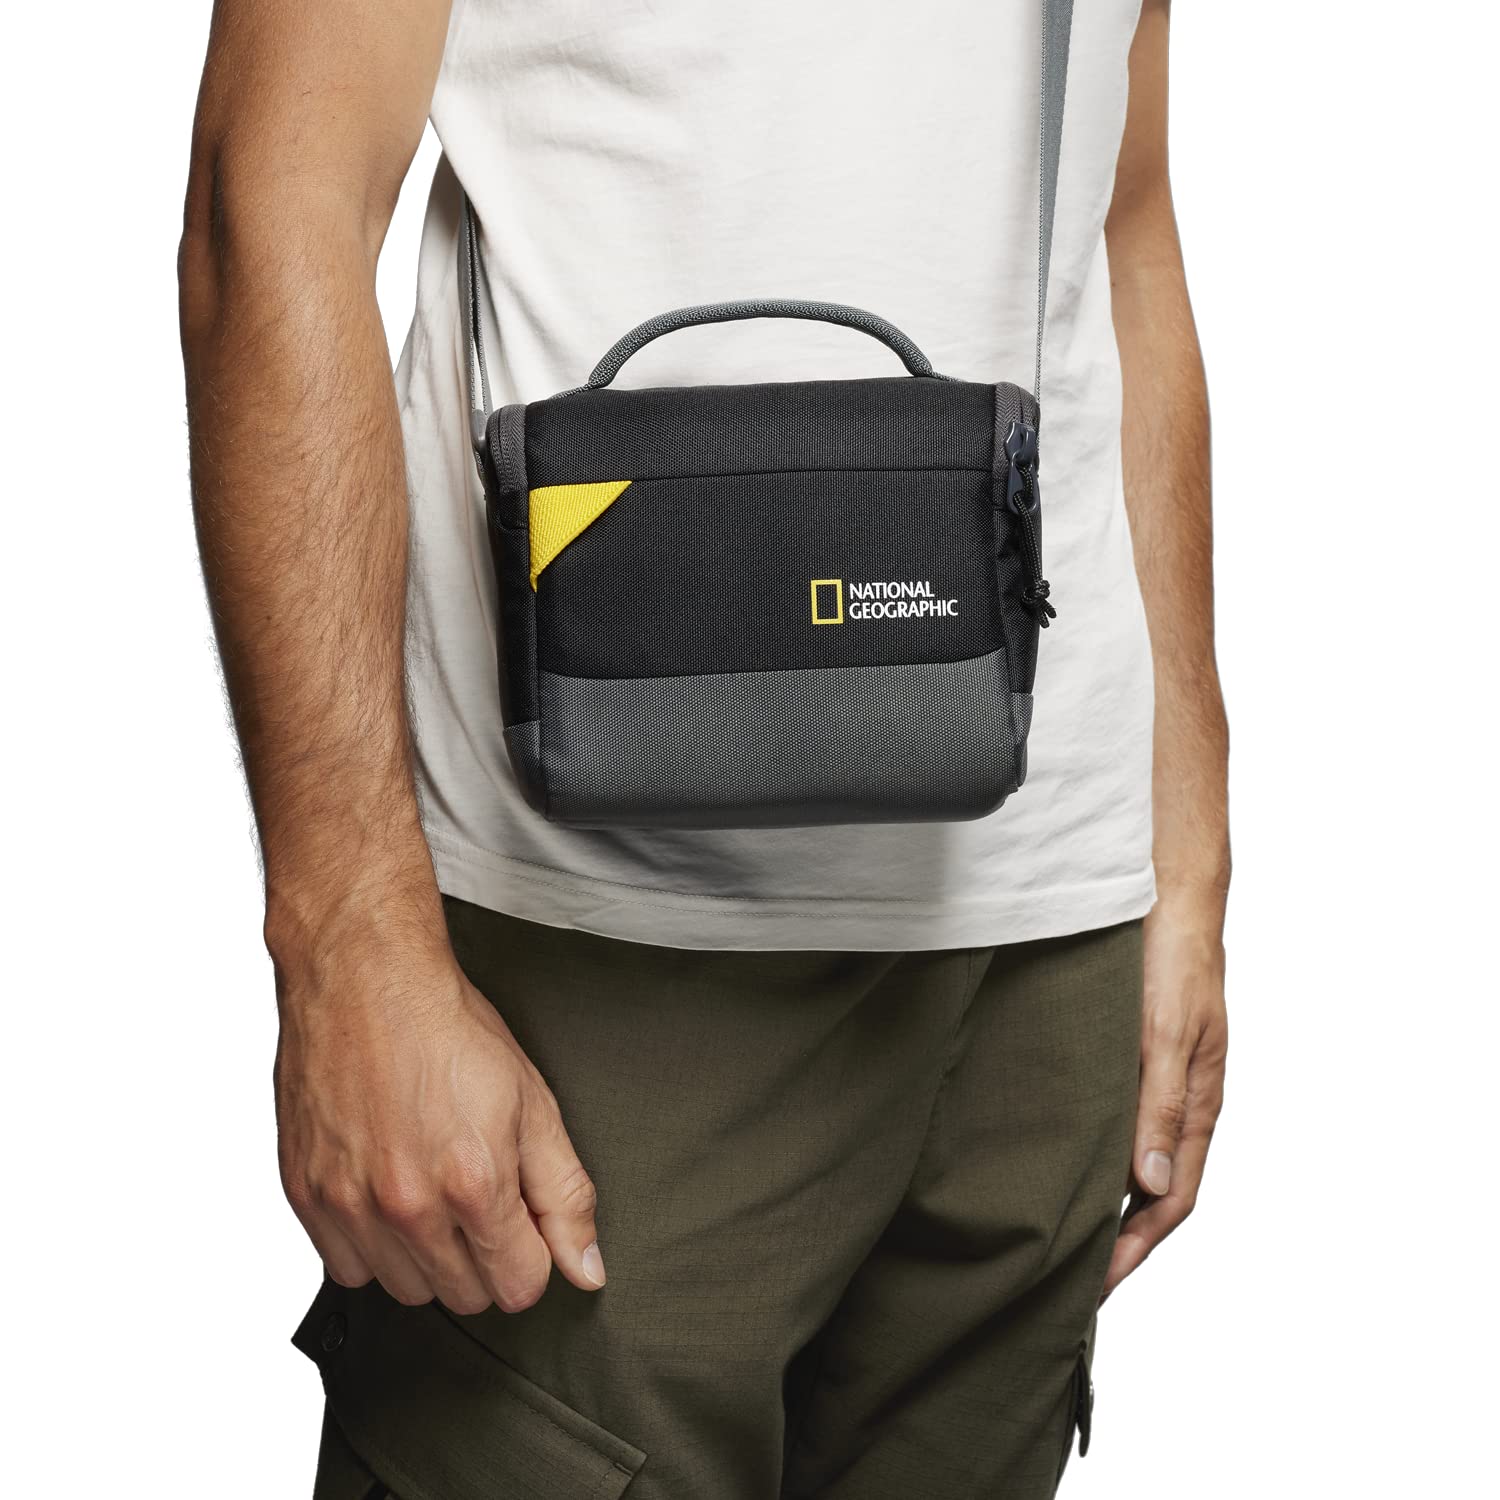 National Geographic Shoulder Bag Small, Camera Bag for DSLR and Mirrorless with Lens, and Accessories, Batteries, Cables, Adjustable Strap, Ultra-Lightweight, NG E1 2360, Black [Amazon Exclusive]